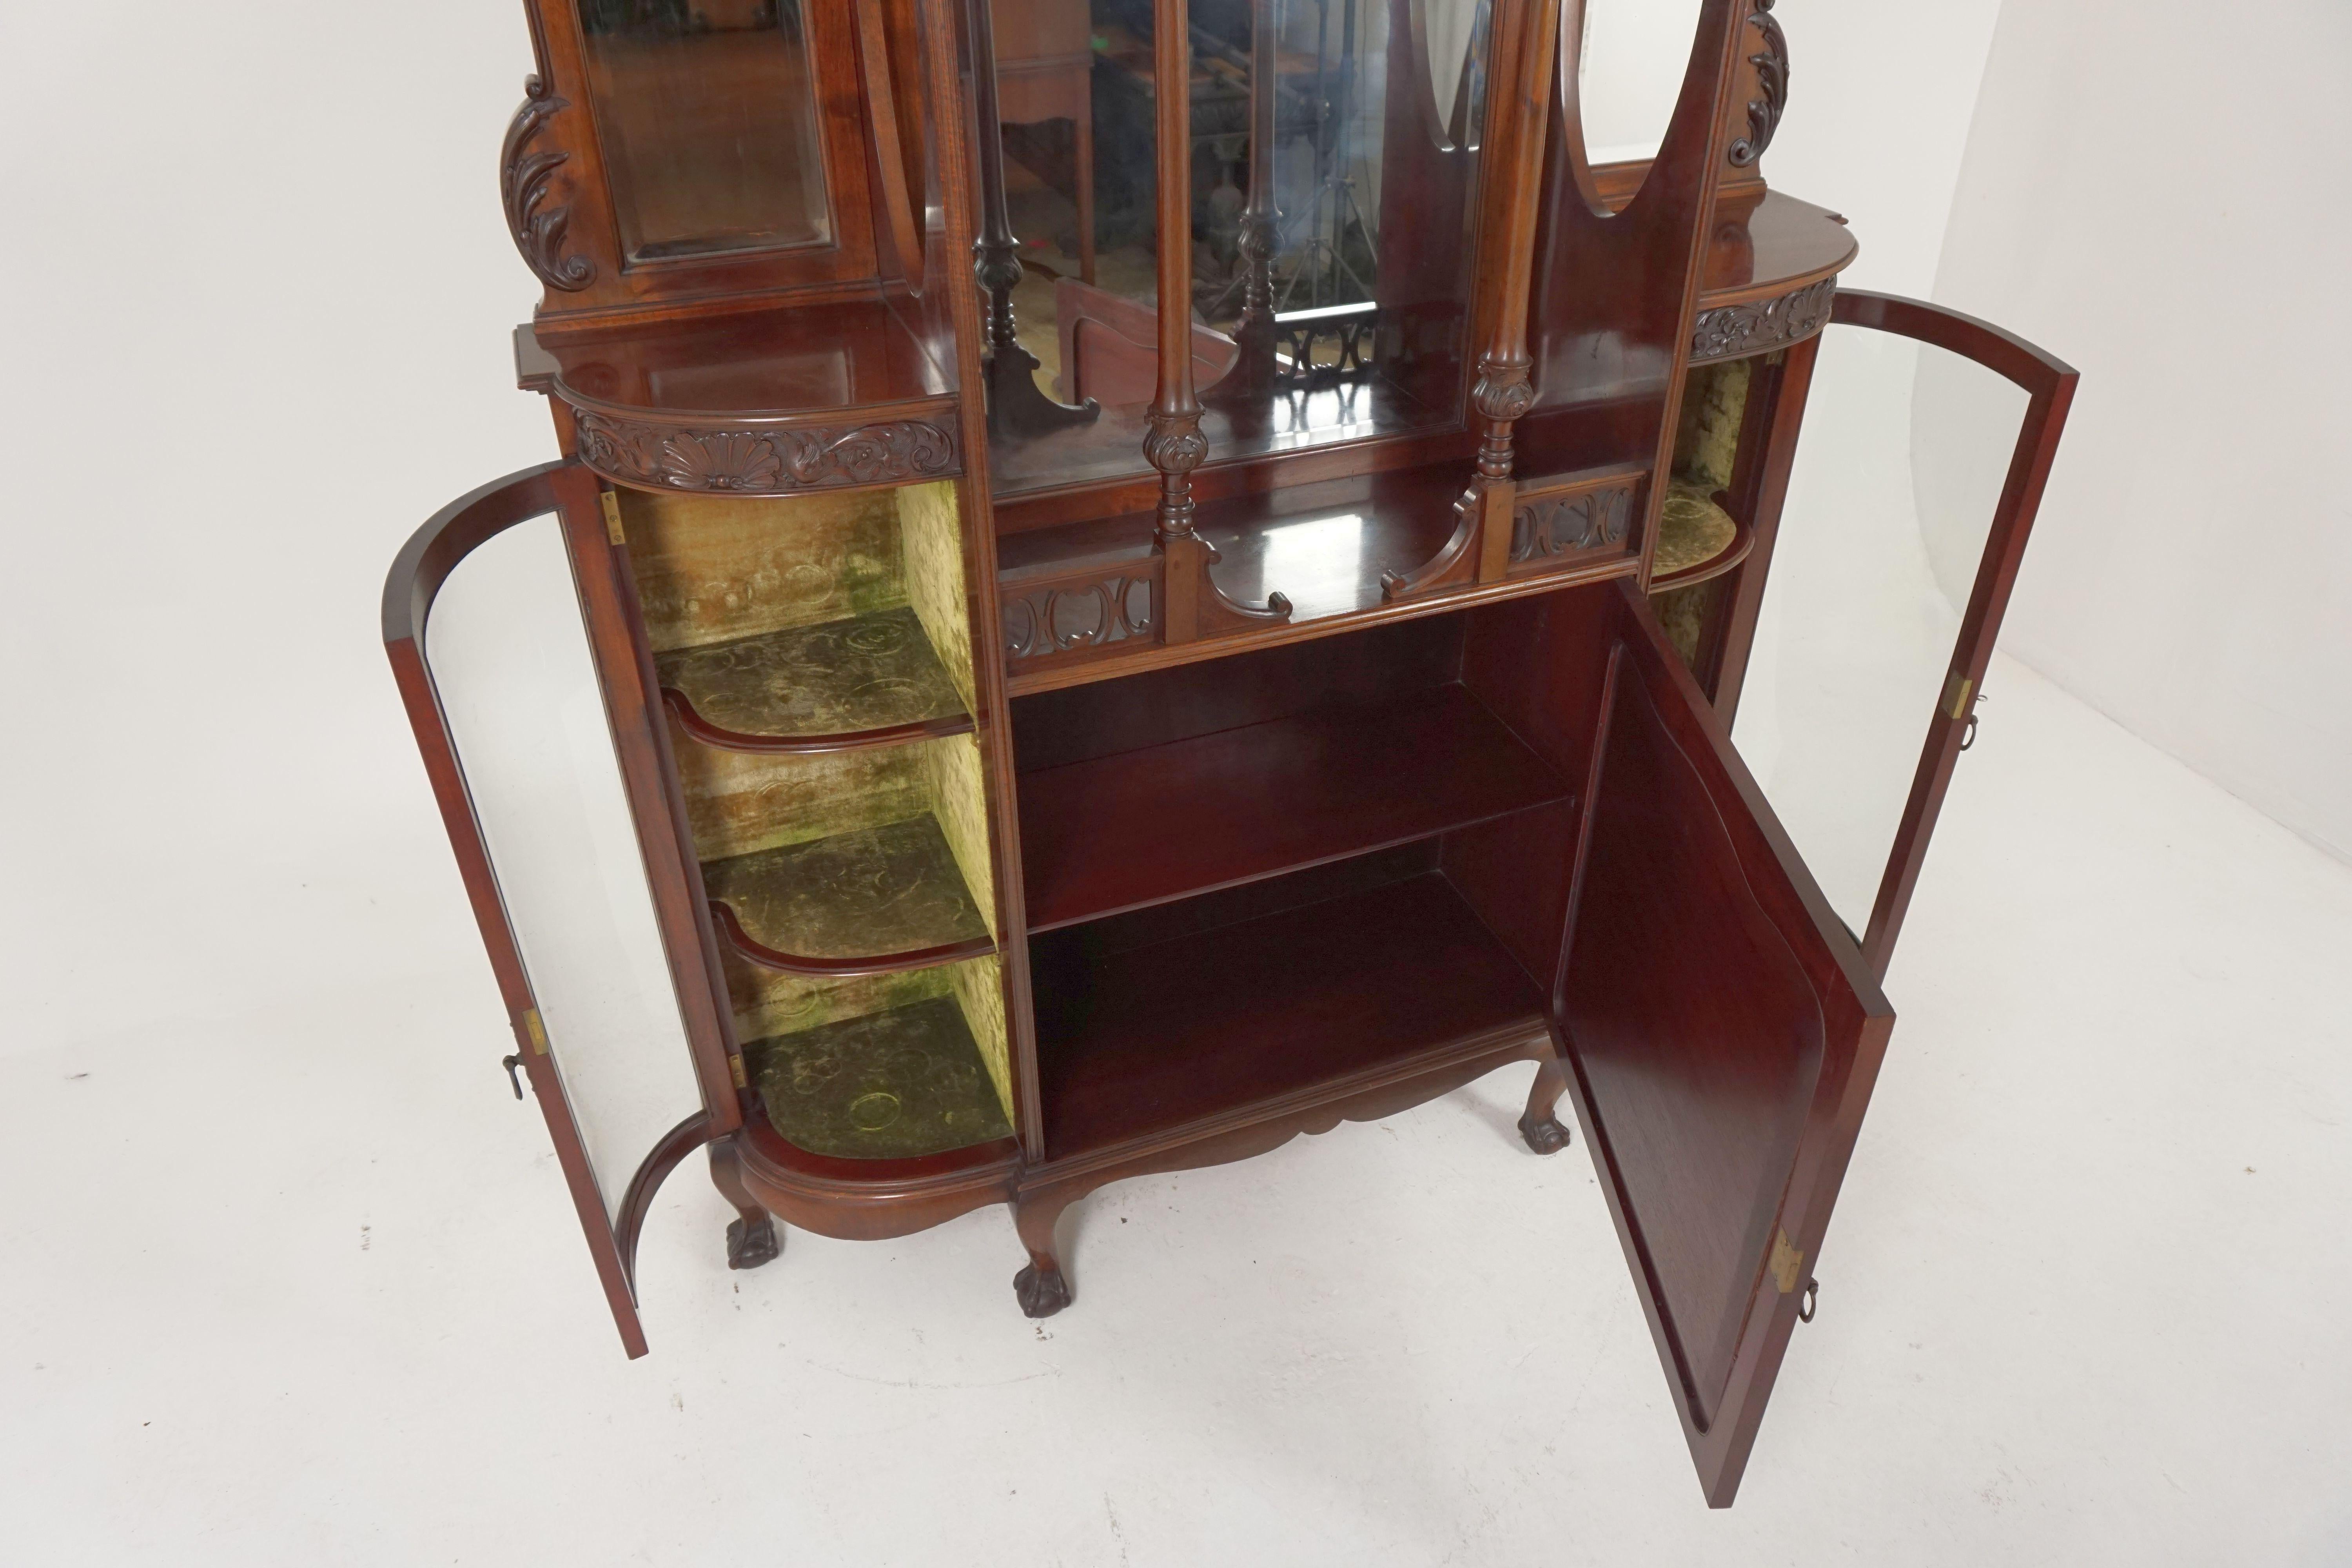 Antique walnut cabinet, Victorian carved parlor cabinet or display cabinet, antique furniture, England, 1880, B1864

England, 1880
Solid walnut
Original finish
Shaped top with carved gallery to the back
Central beveled mirror is surrounded by